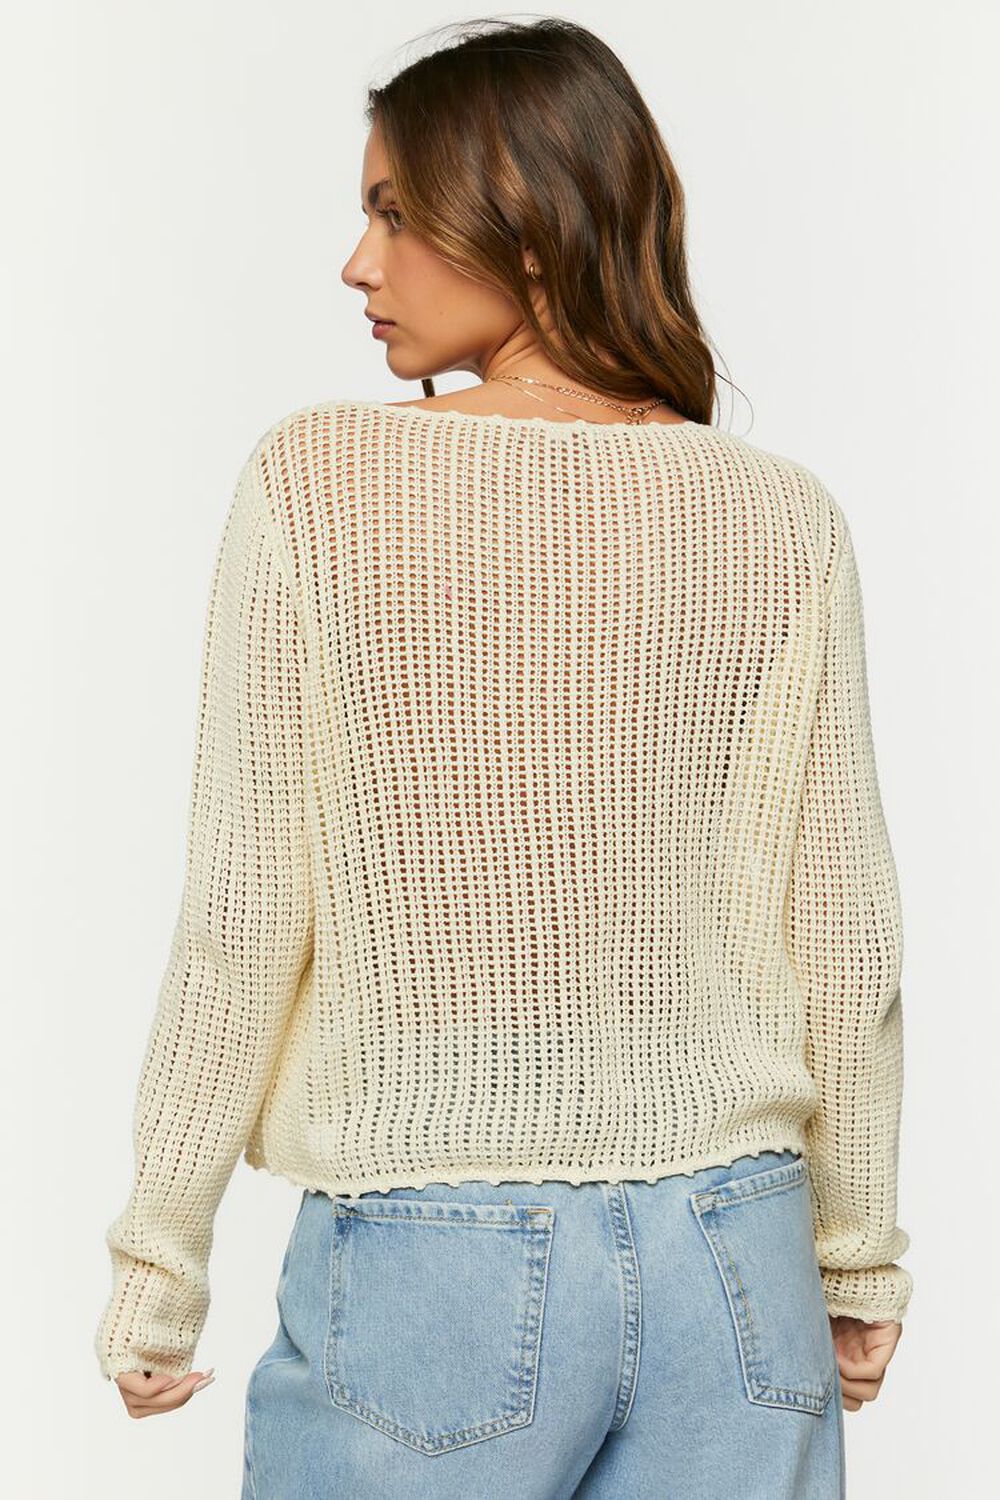 Open-Knit Floral Sweater